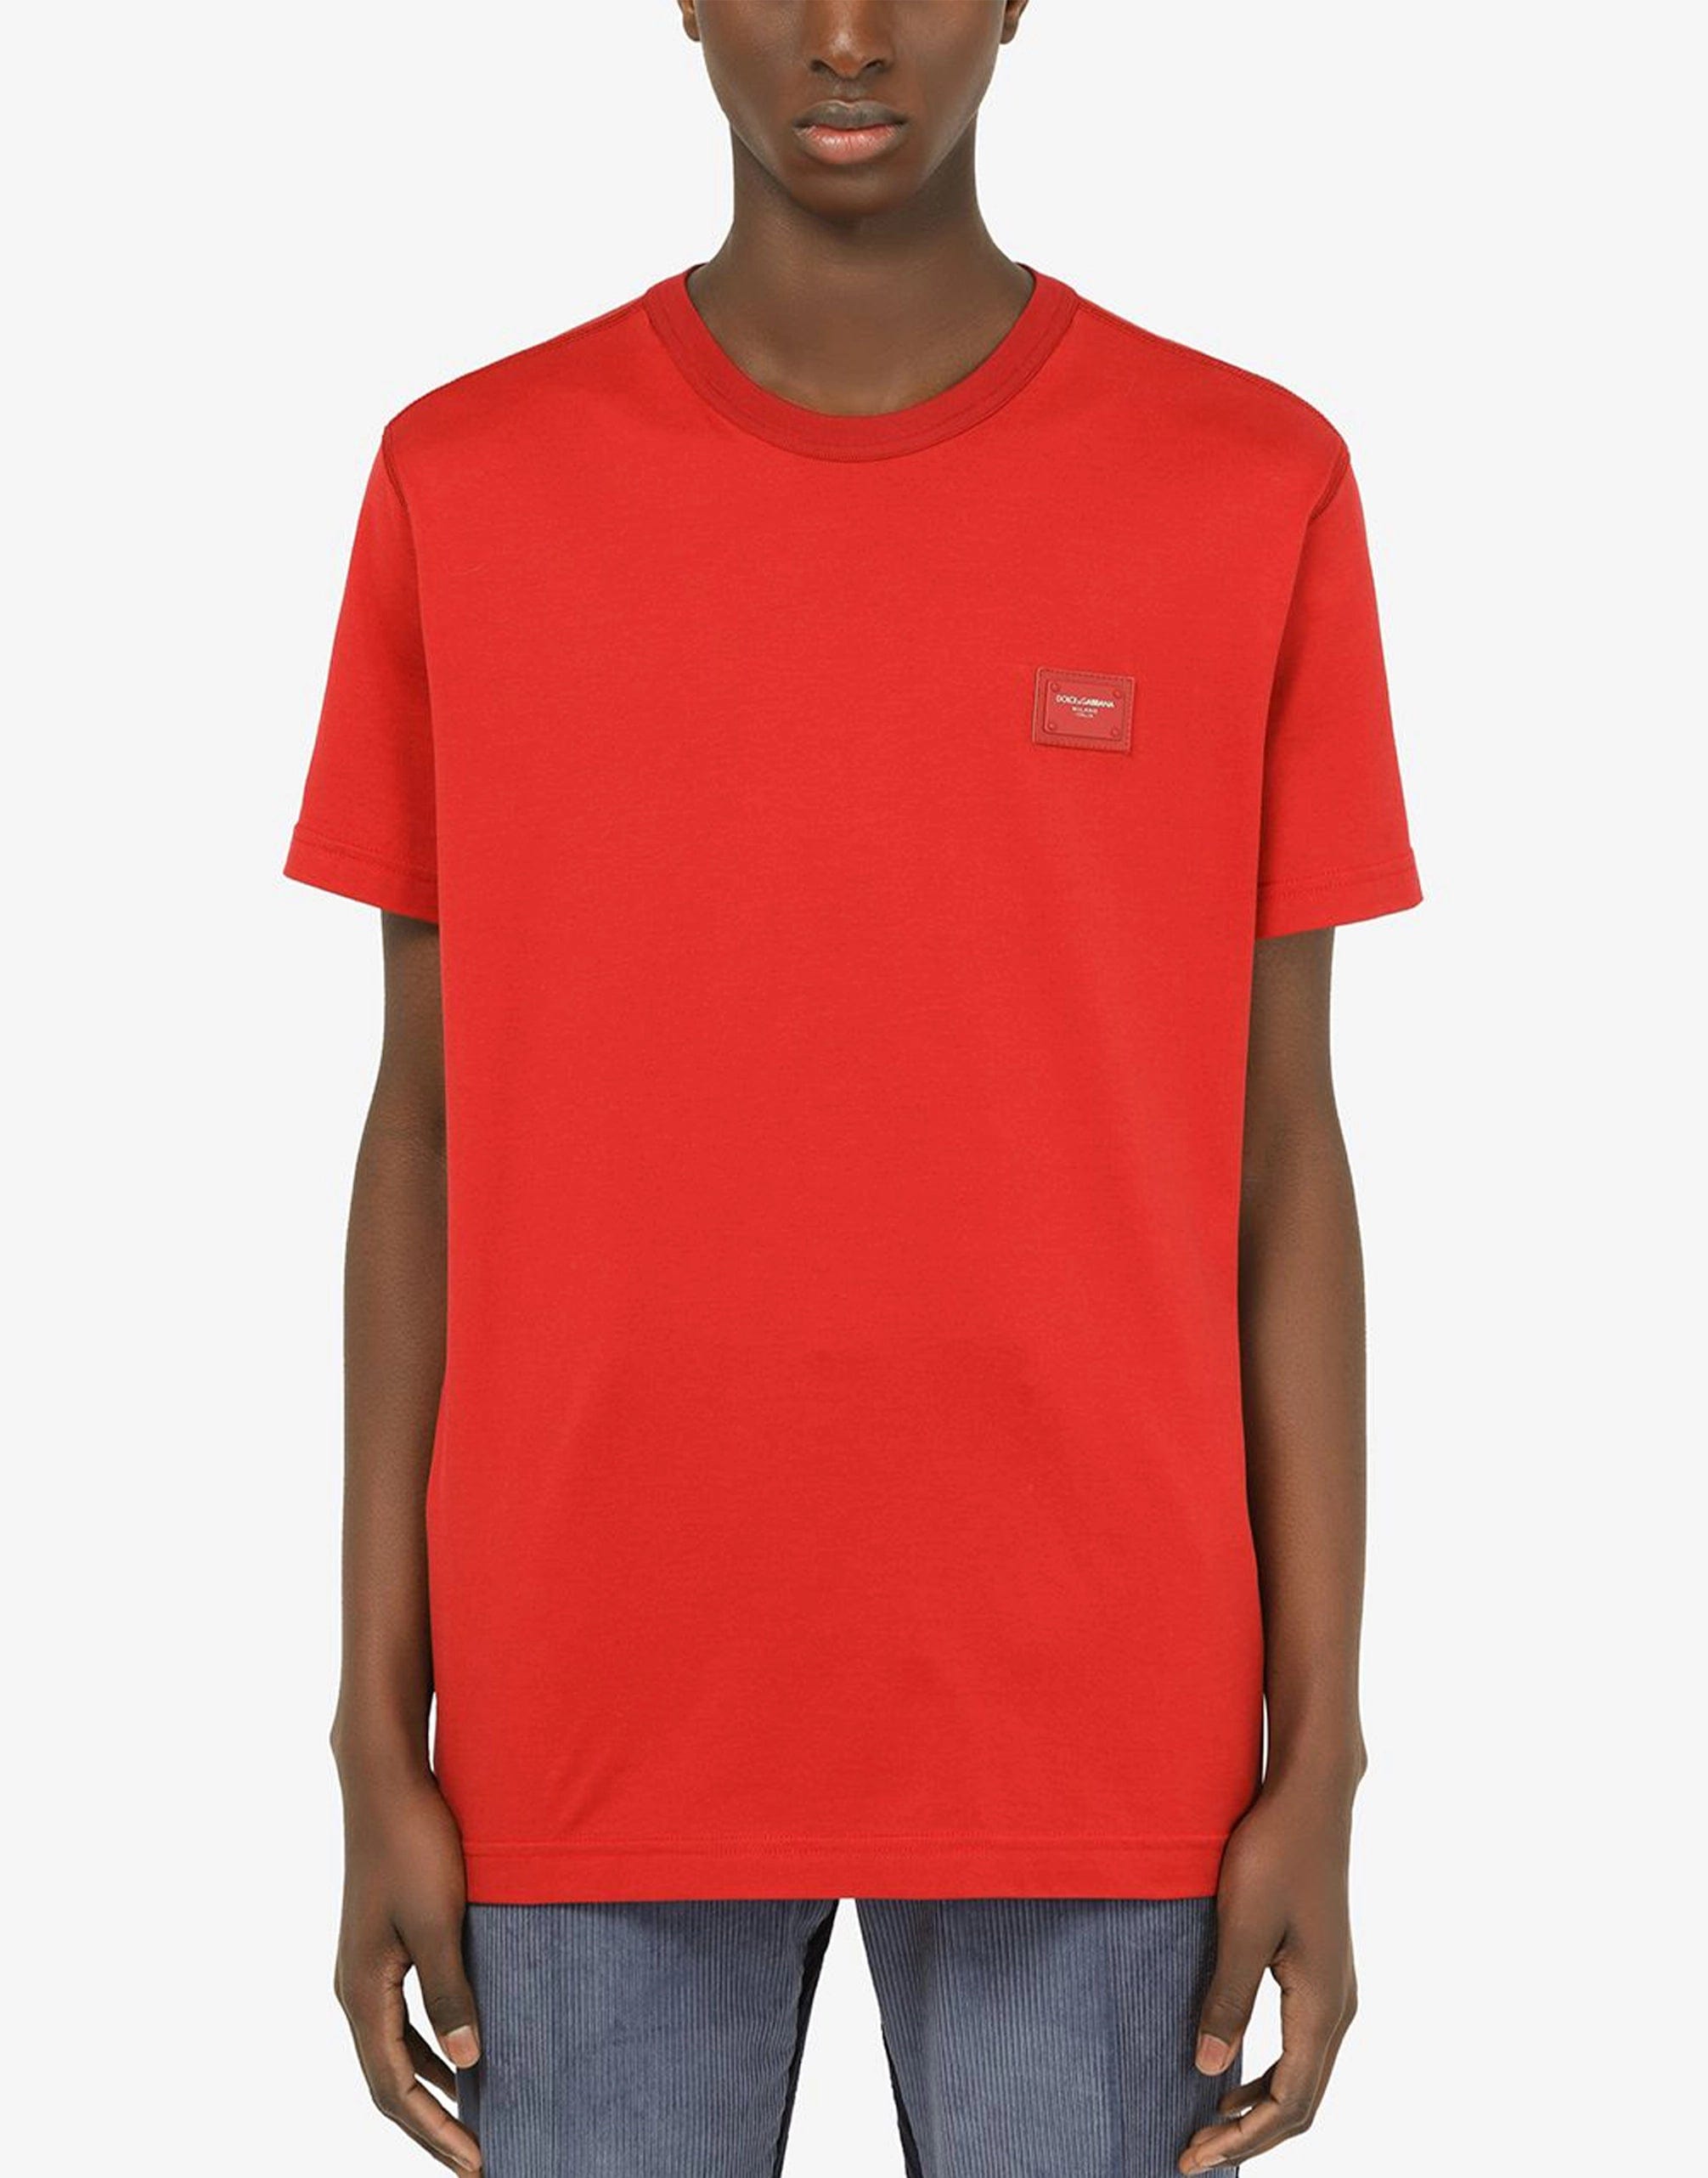 Cotton T-Shirt With Branded Plate In Red